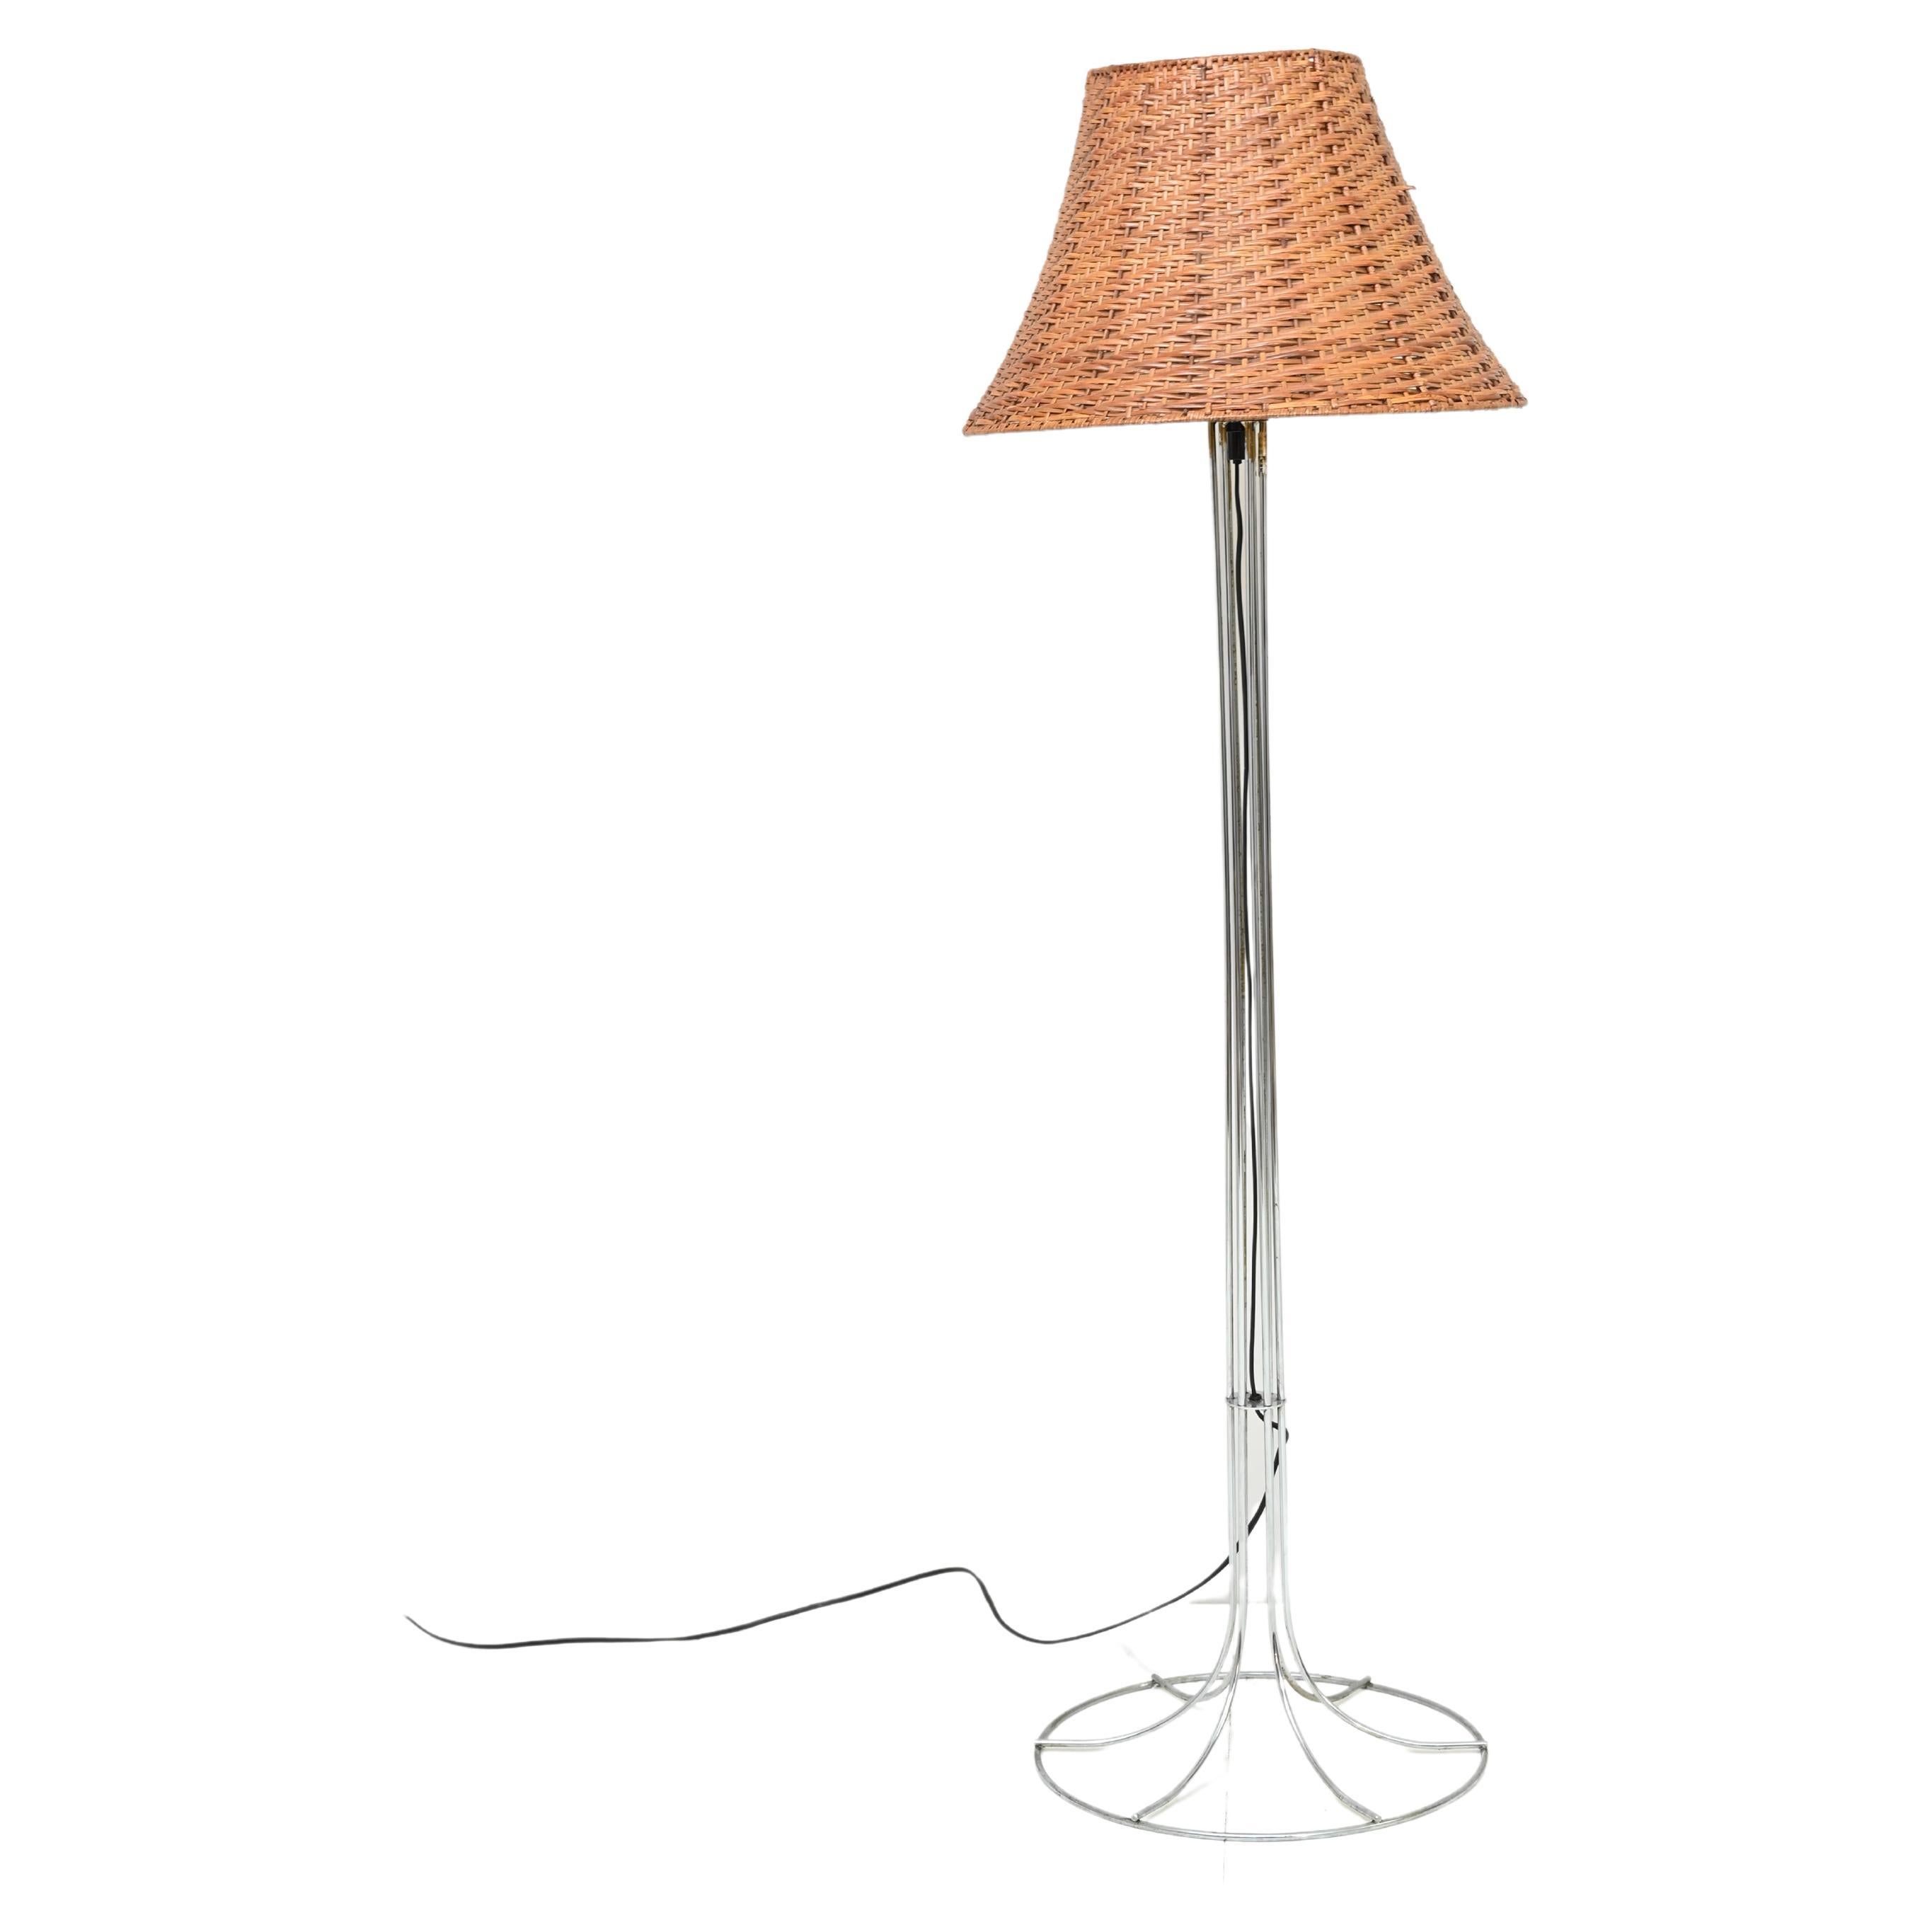 Floor lamp with a rattan lampshade